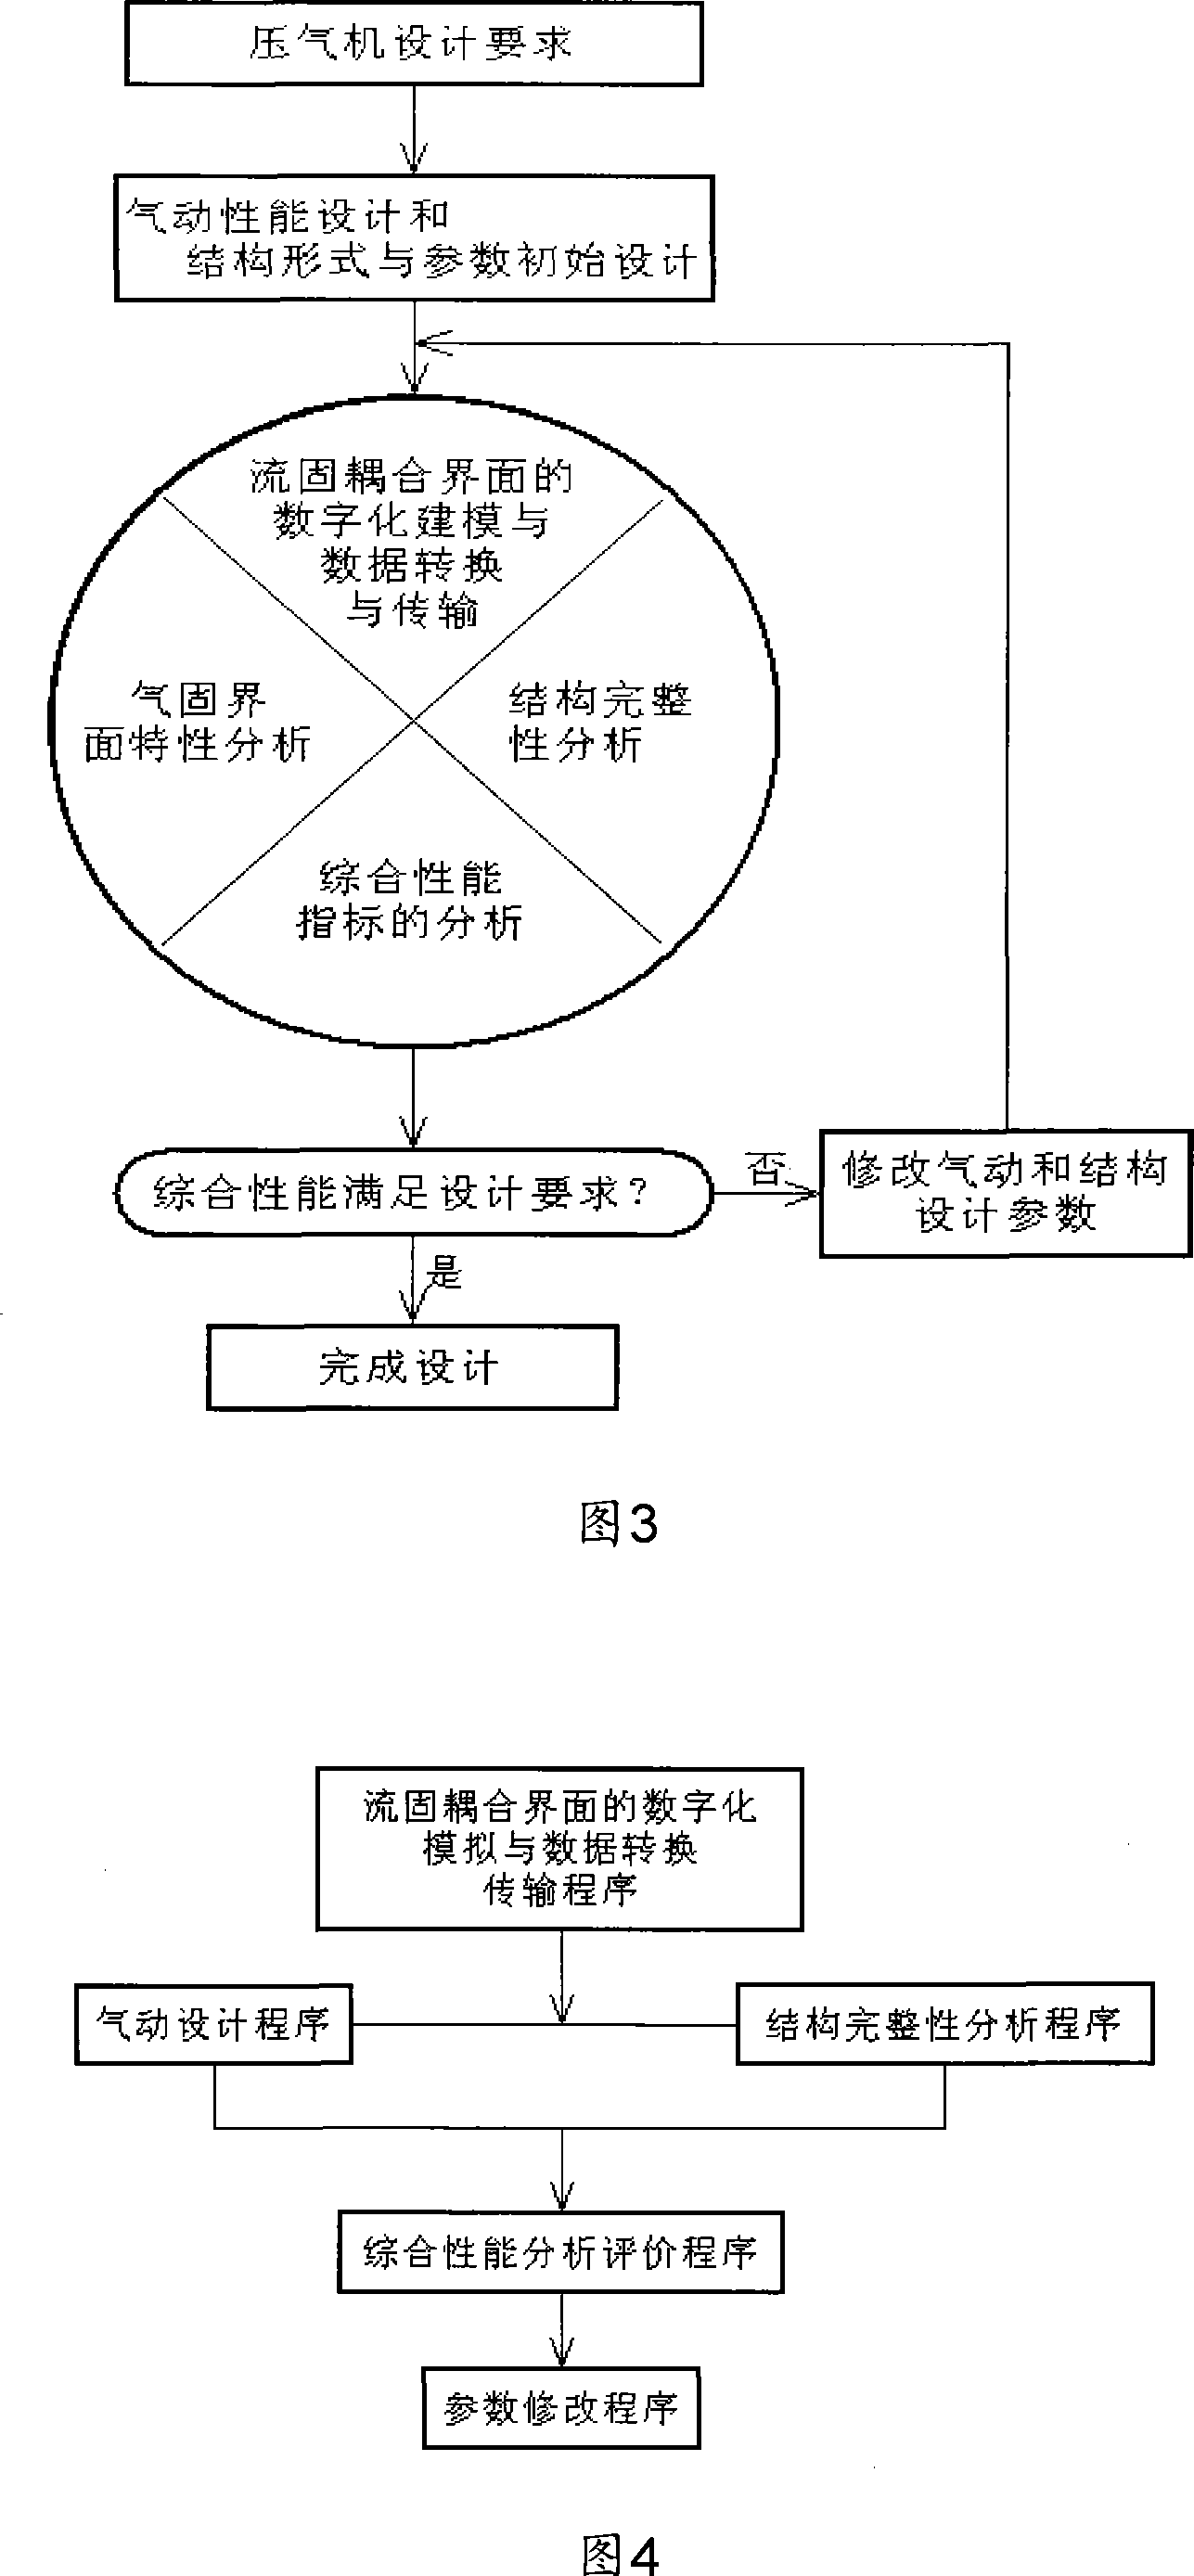 Big and small blade integral leaf disc structural integrity fluid-solid coupling integrated design method